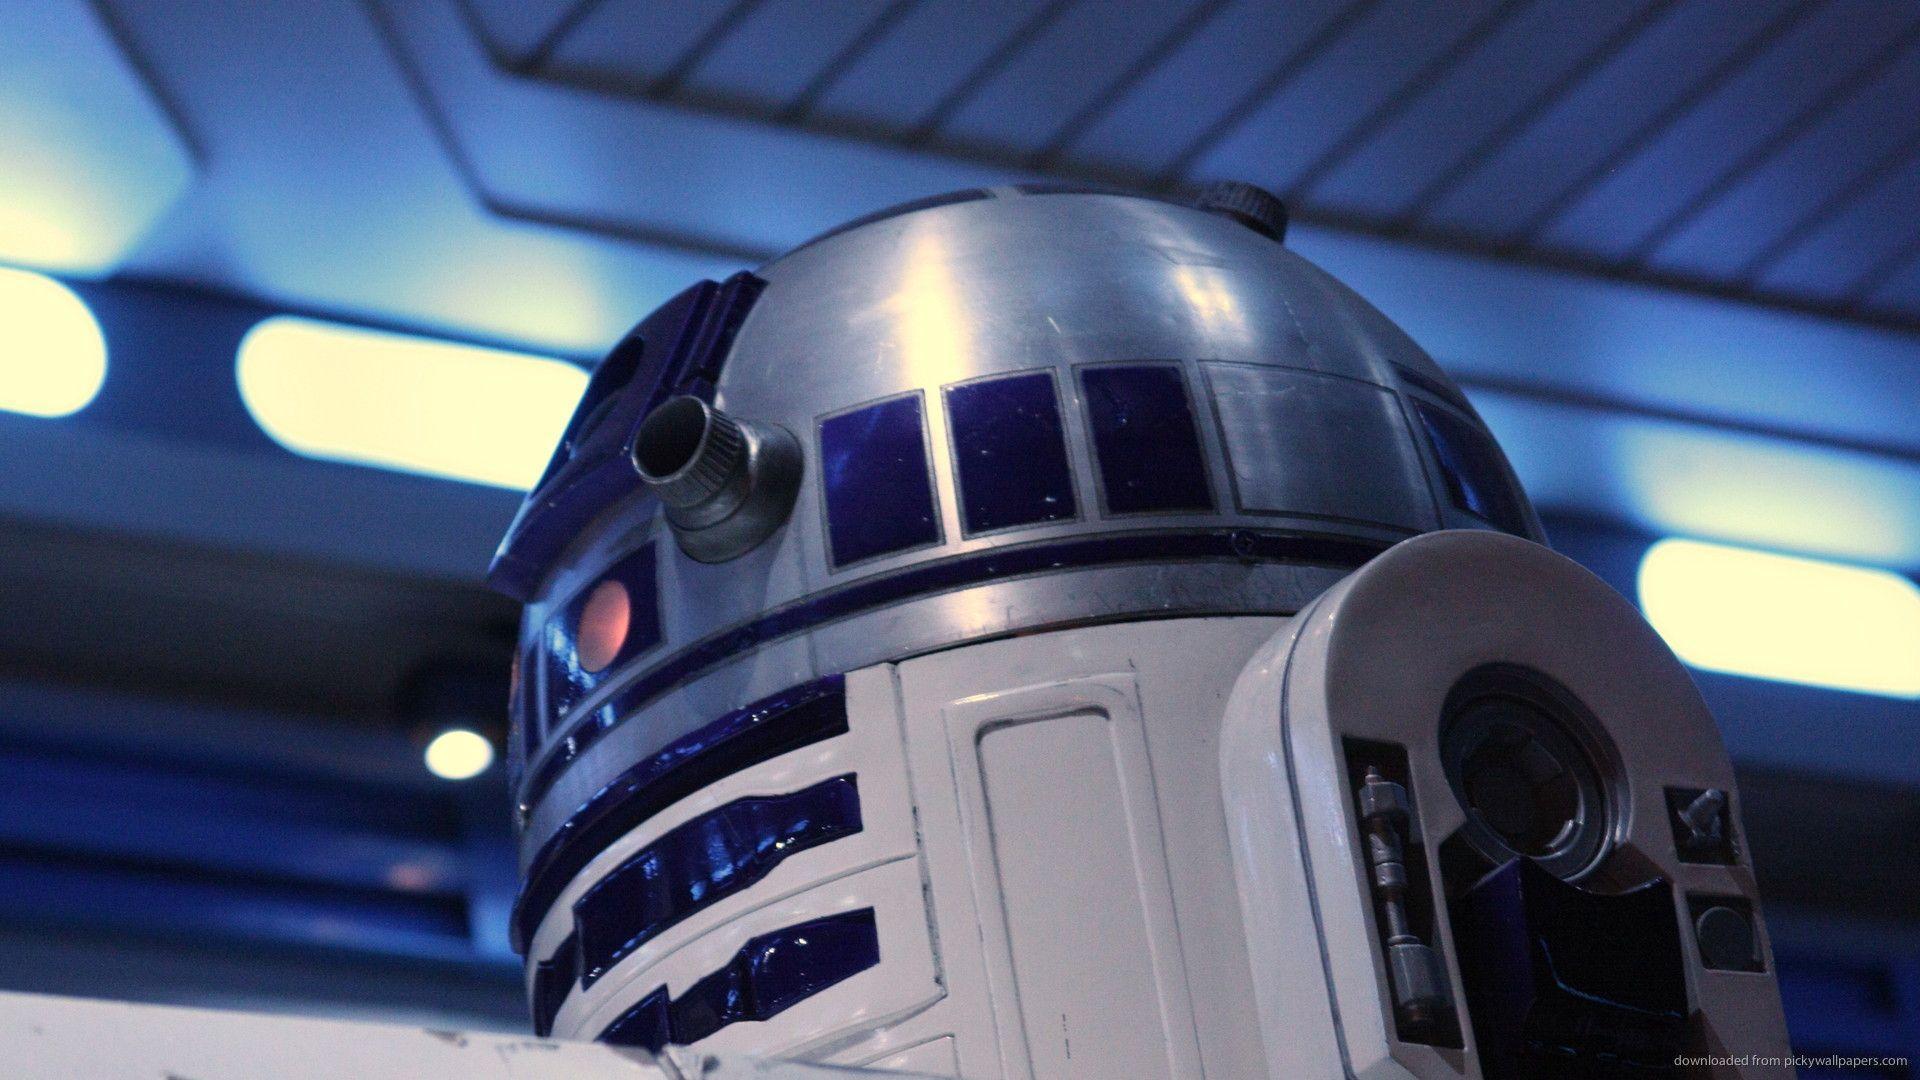 Download 1920x1080 Mounted R2D2 Wallpapers